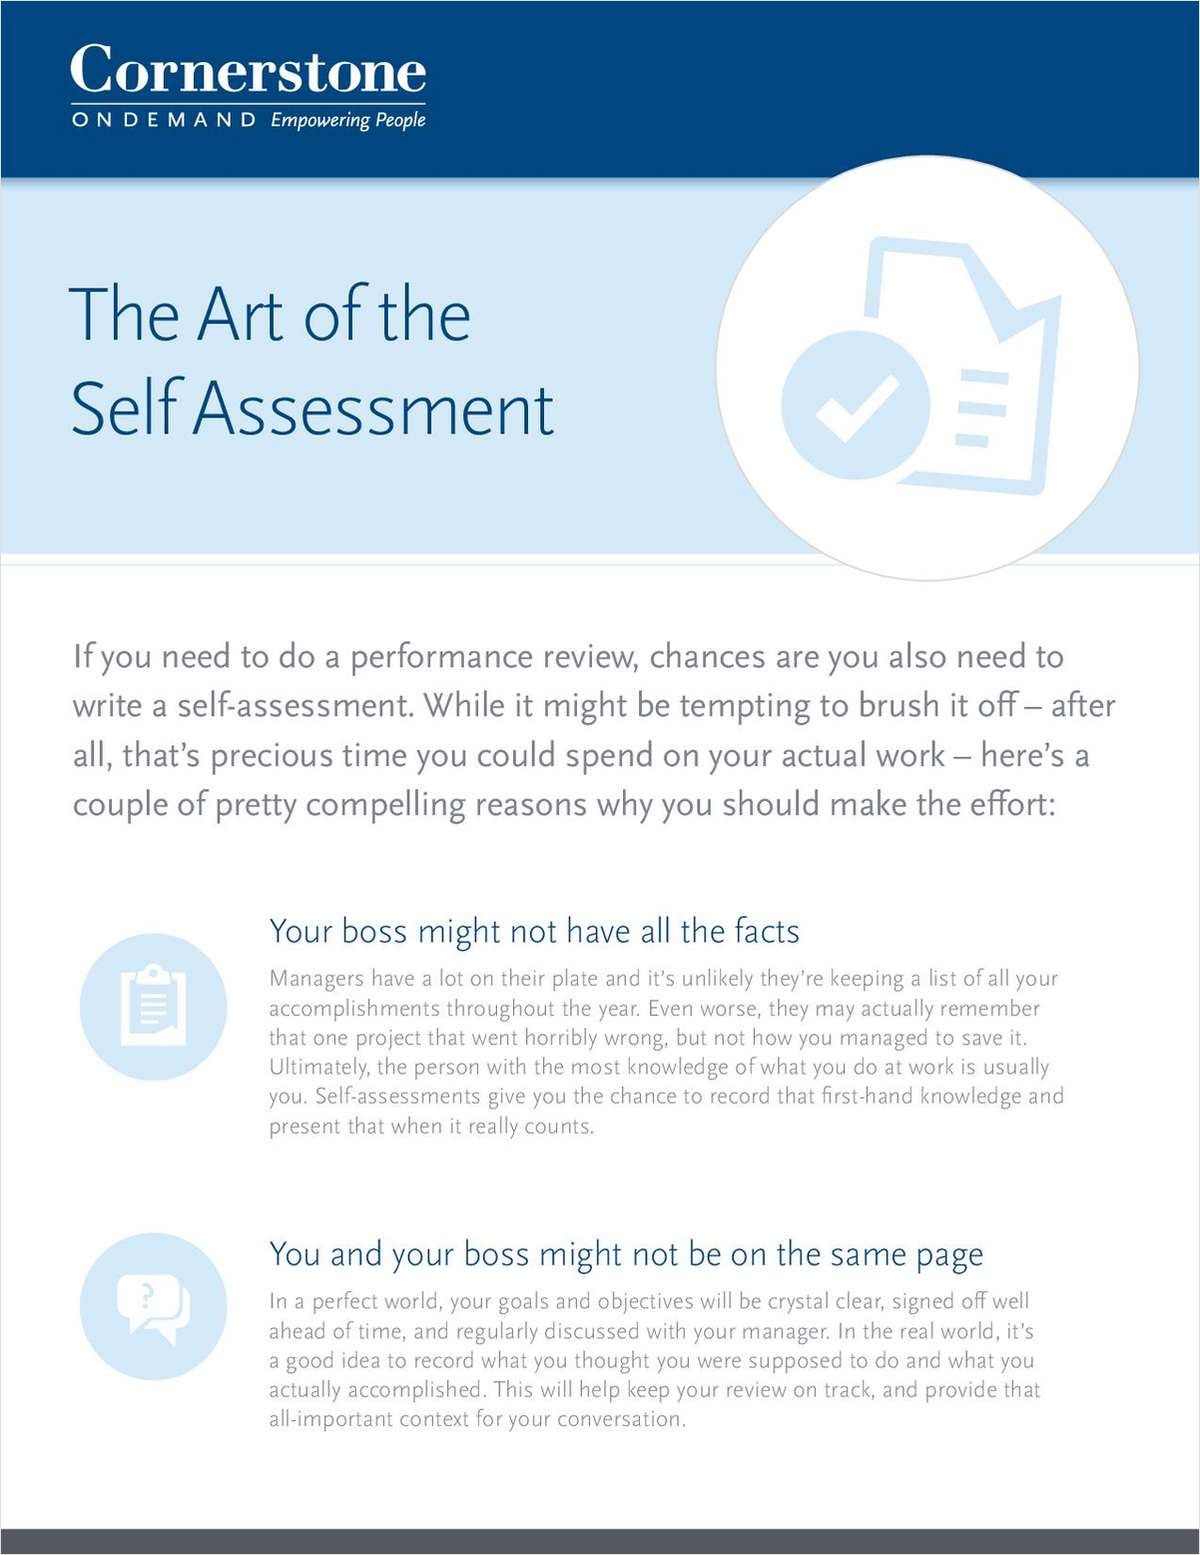 The Art of the Self-Assessment